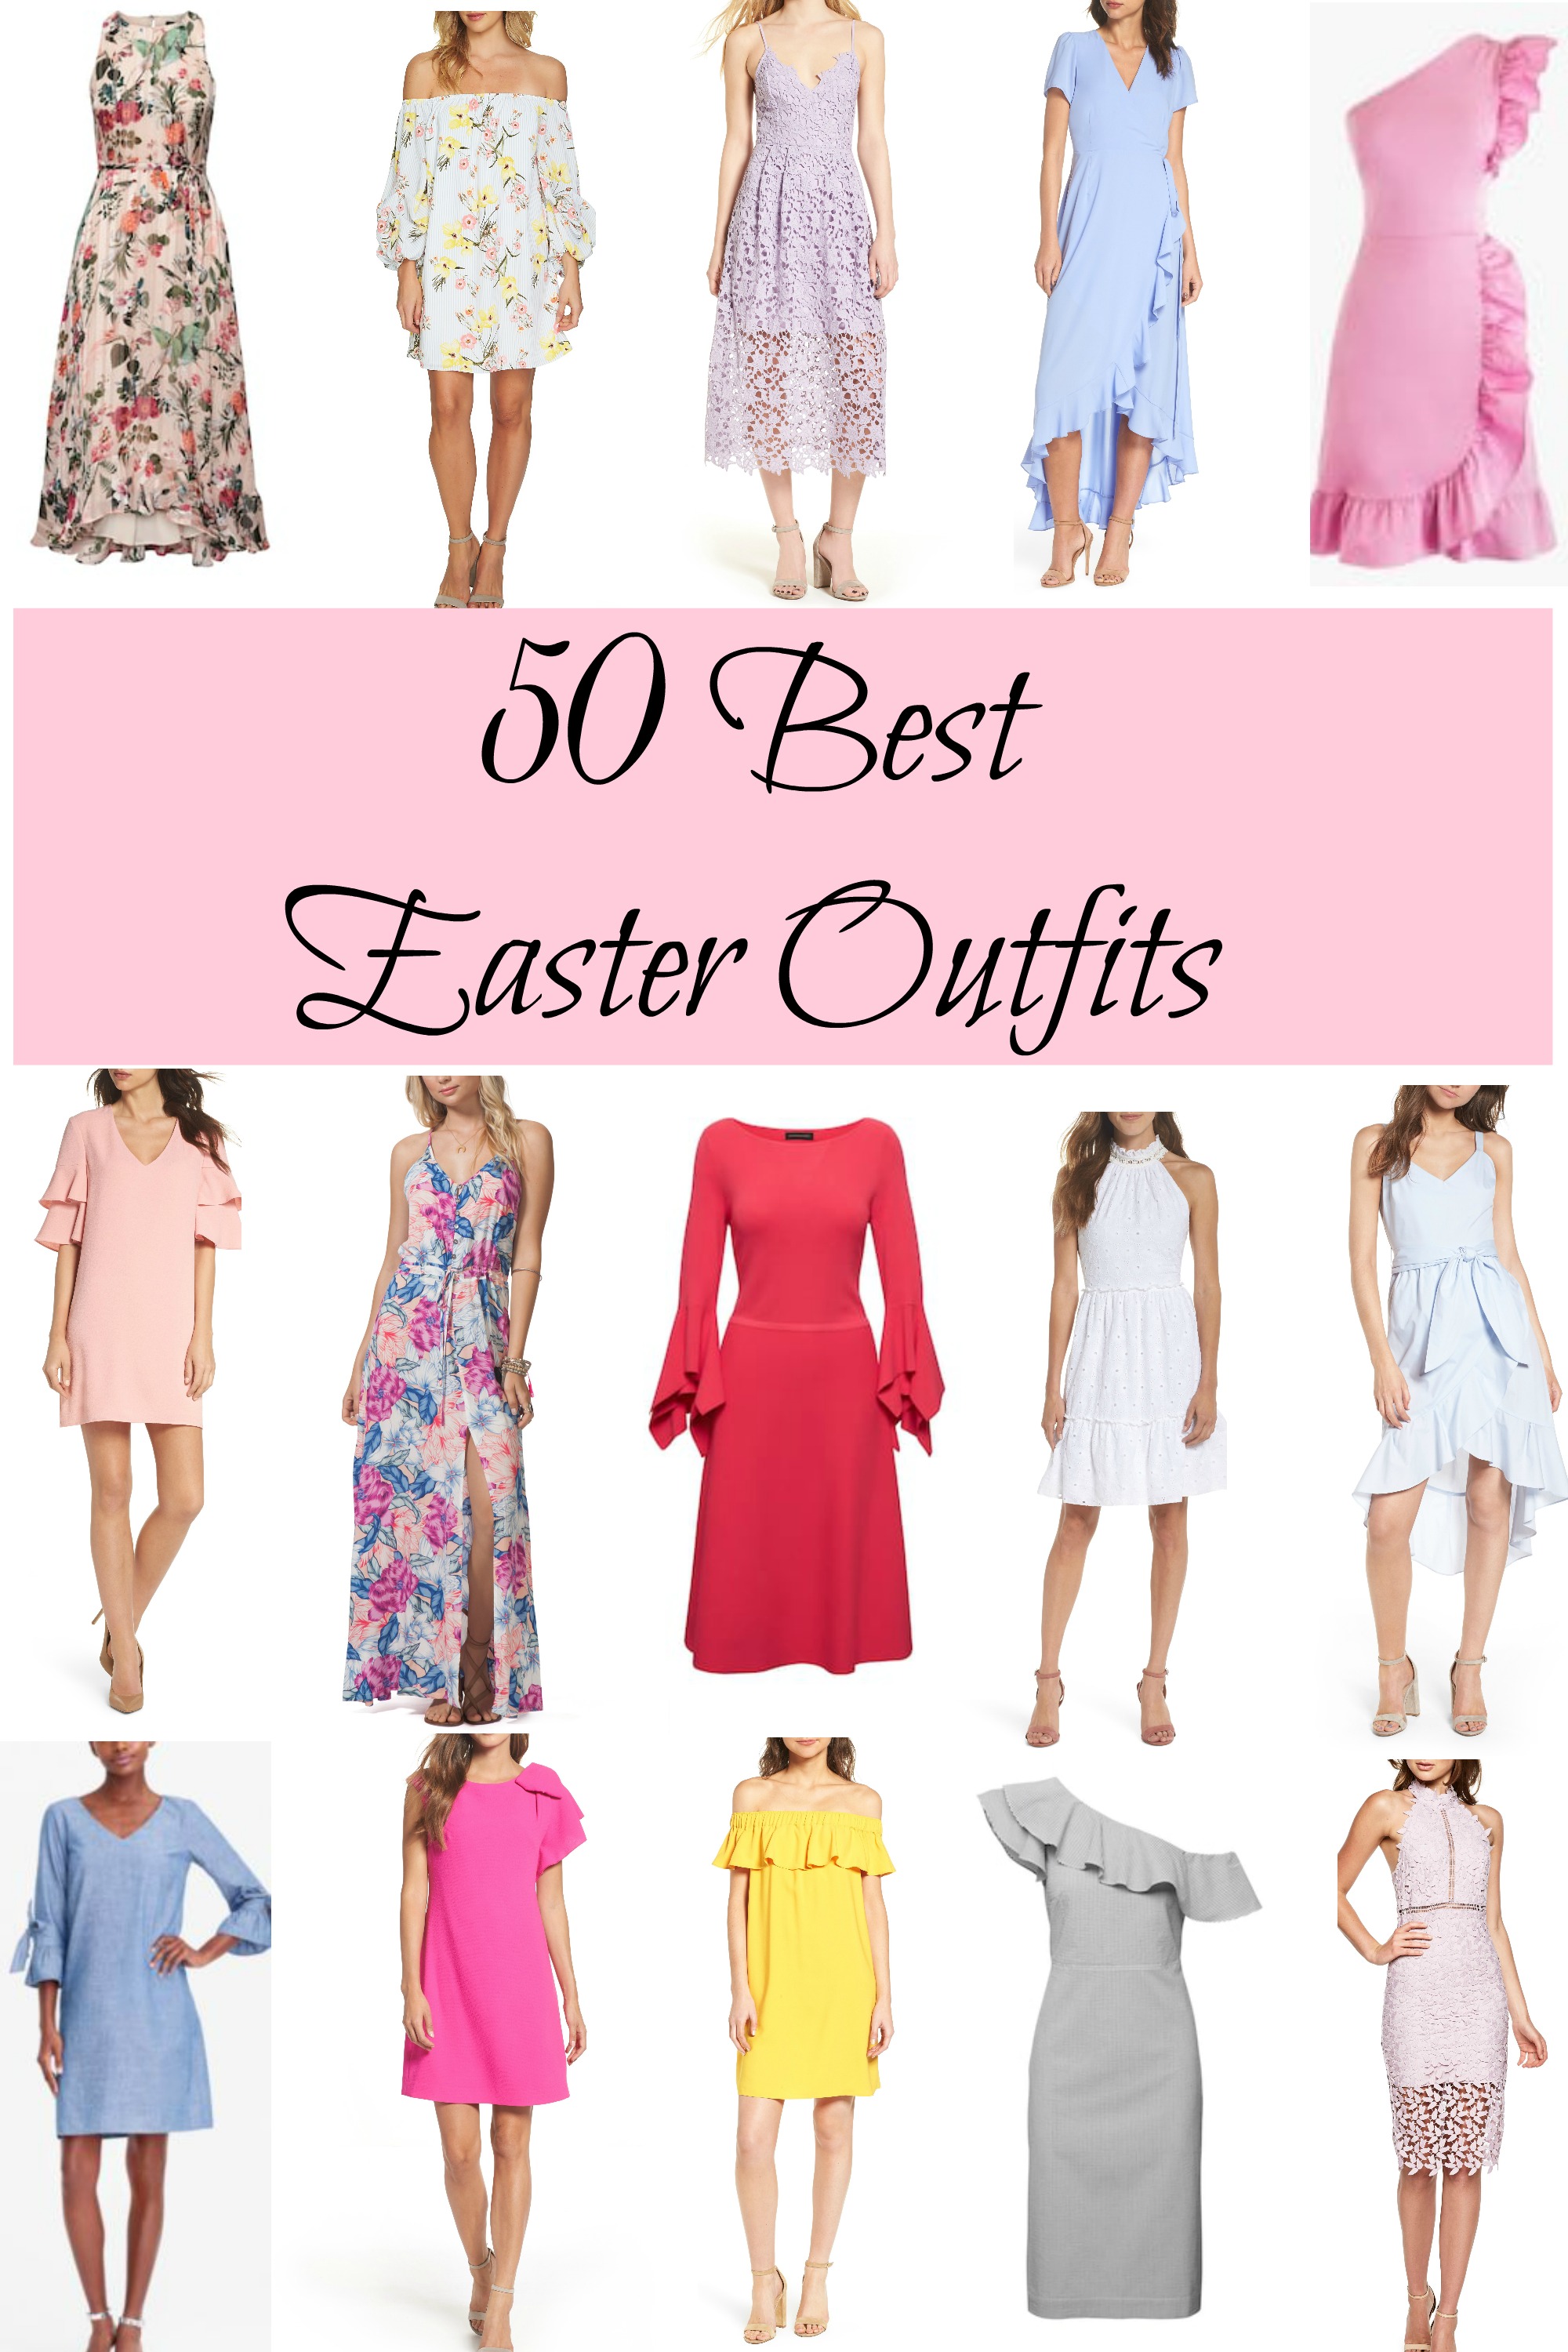 50 Best Easter Outfits - Daily Dose of Style